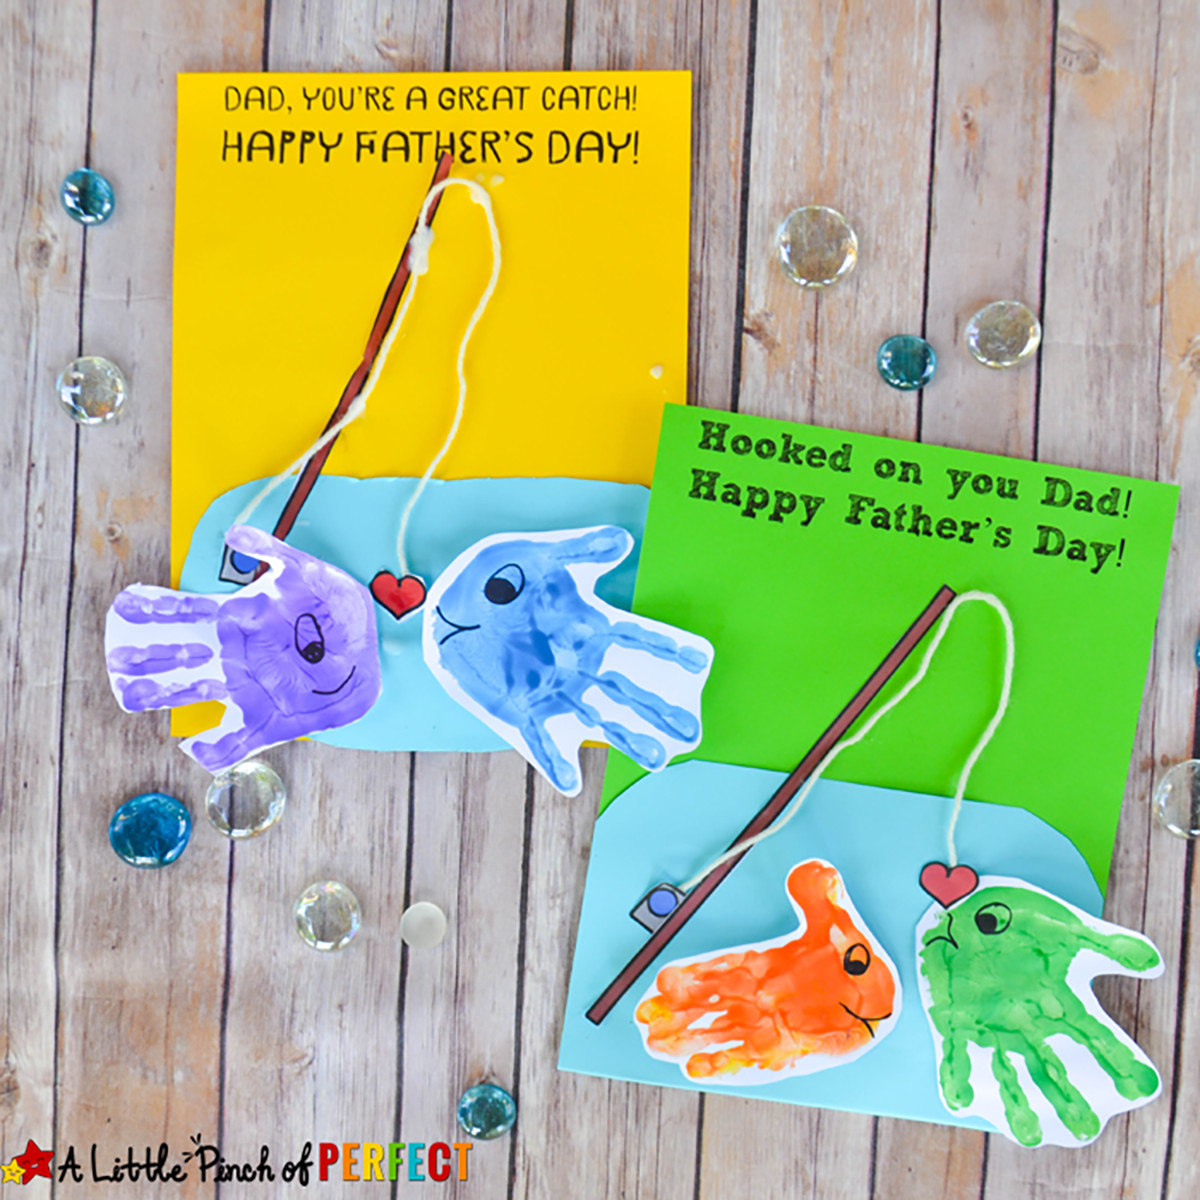 Kindergarten Fathers Day Crafts
 DIY Preschool Father s Day Gifts Your Little es Will